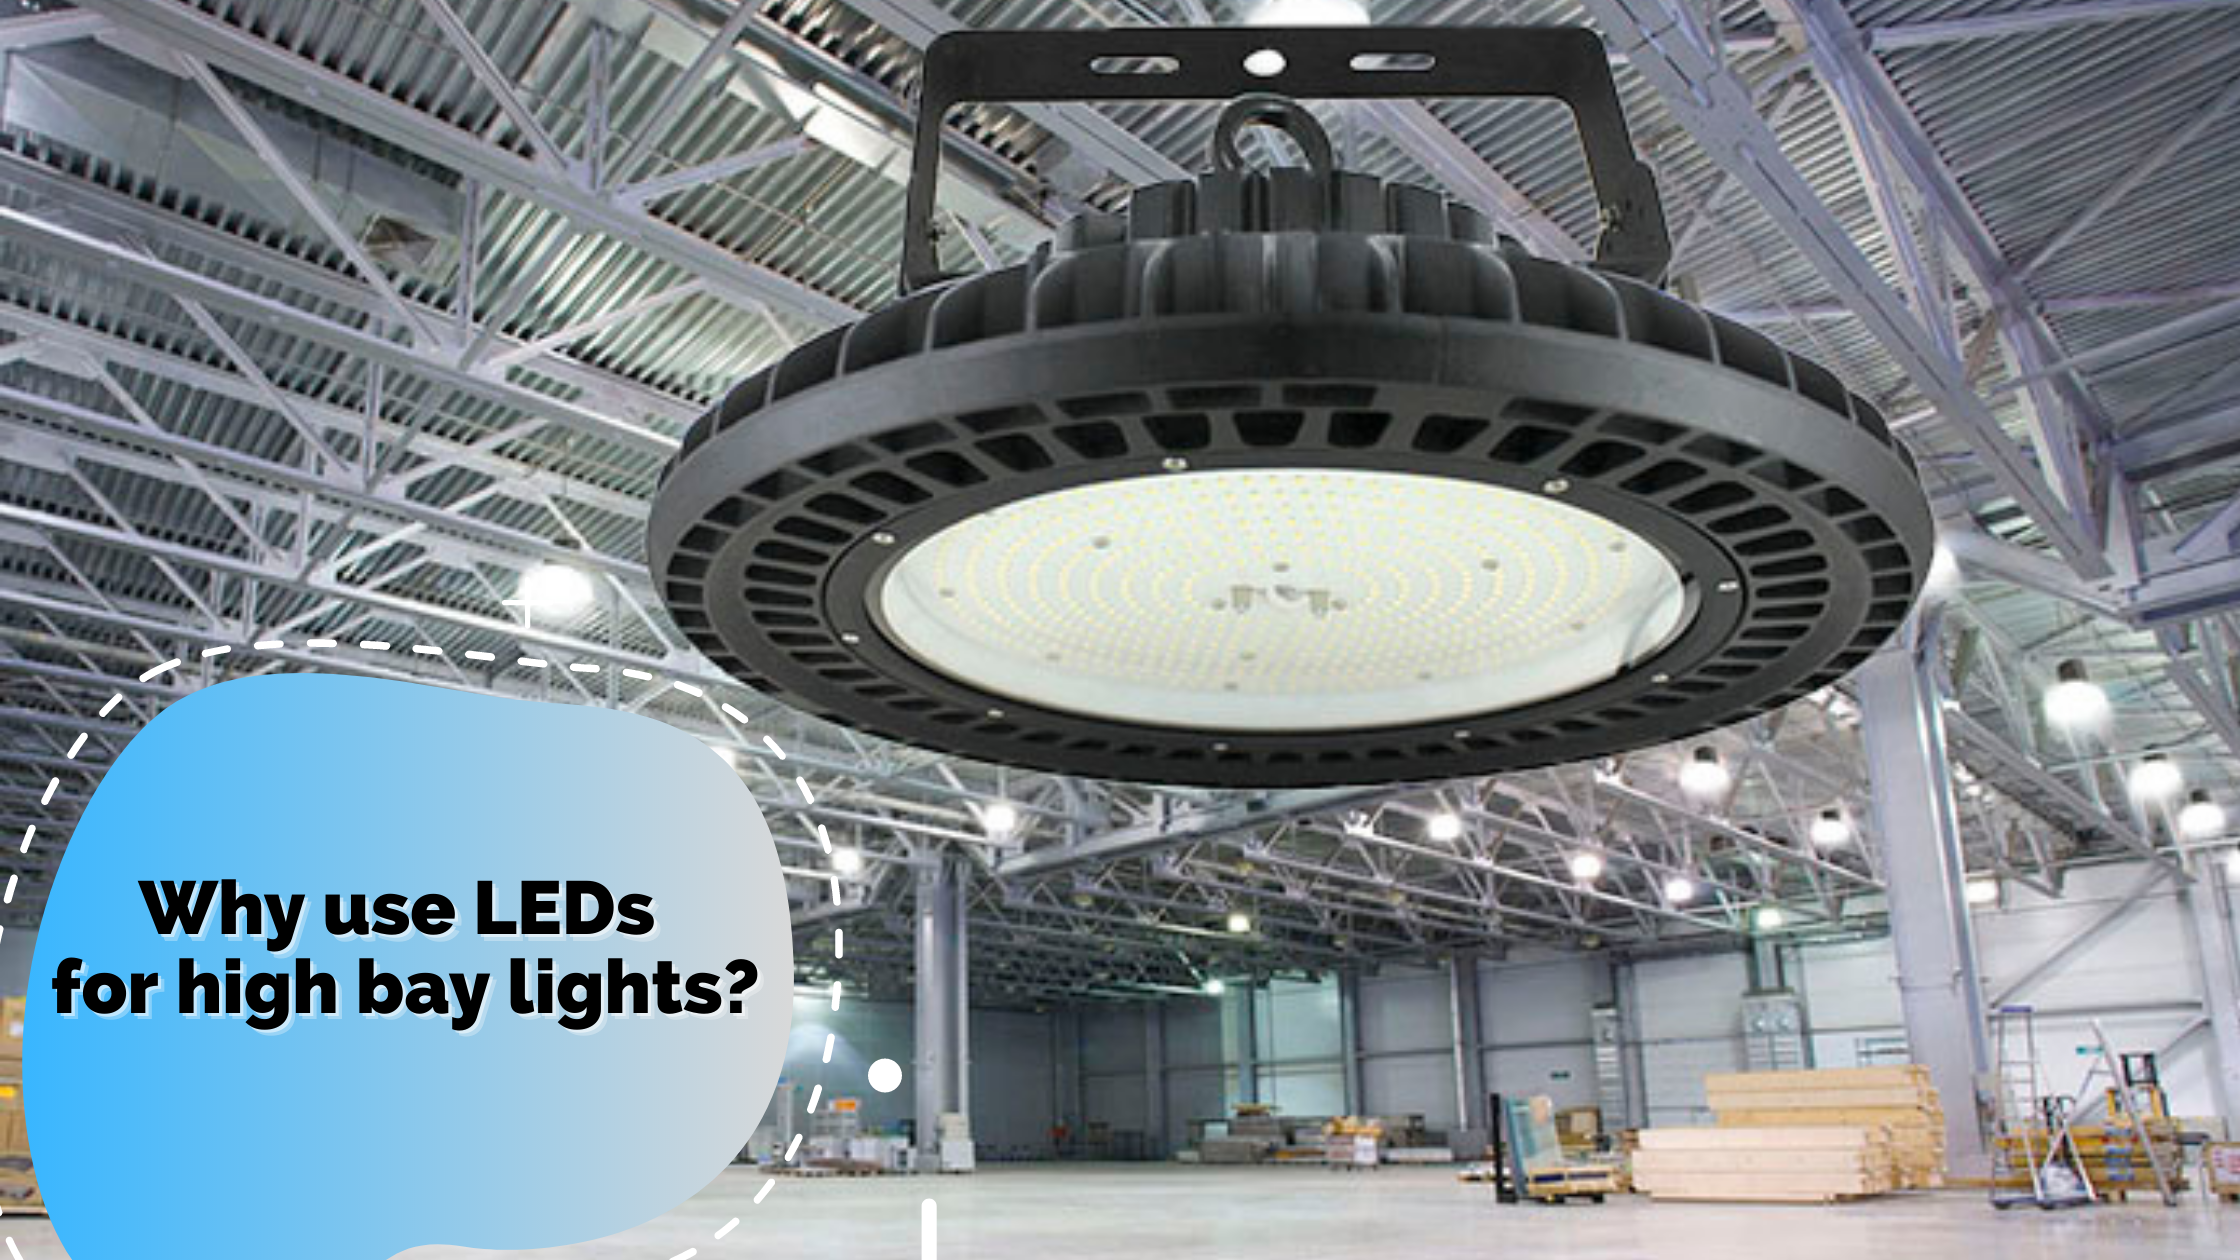 Why use LEDs for high bay lights?